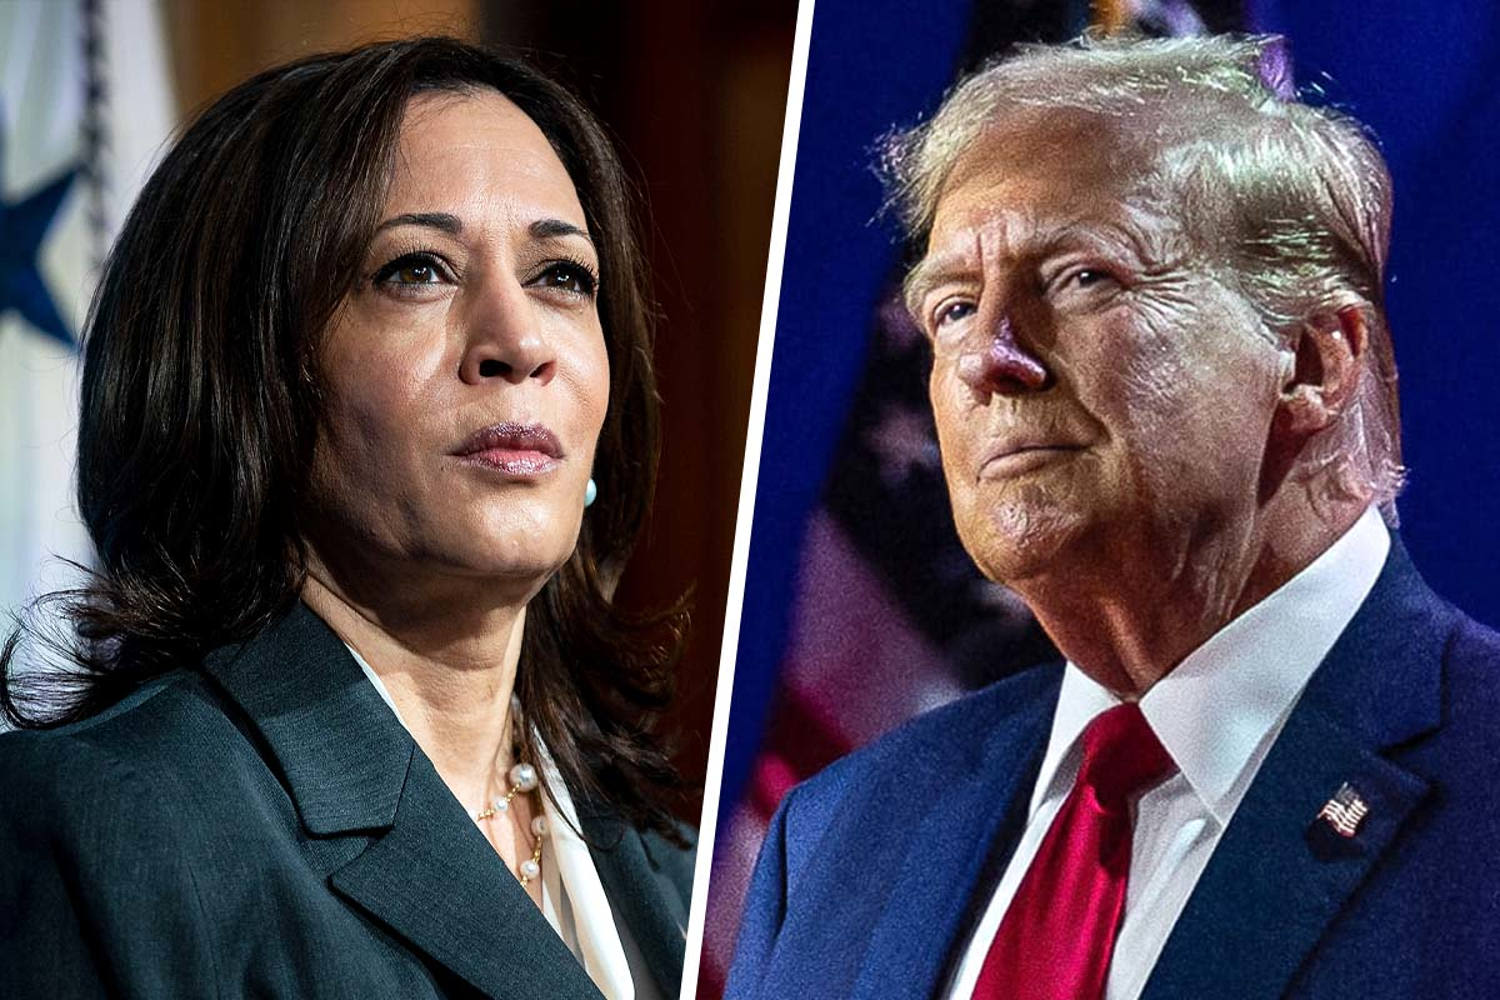 The gender gap widens in the Harris-Trump contest: From the Politics Desk